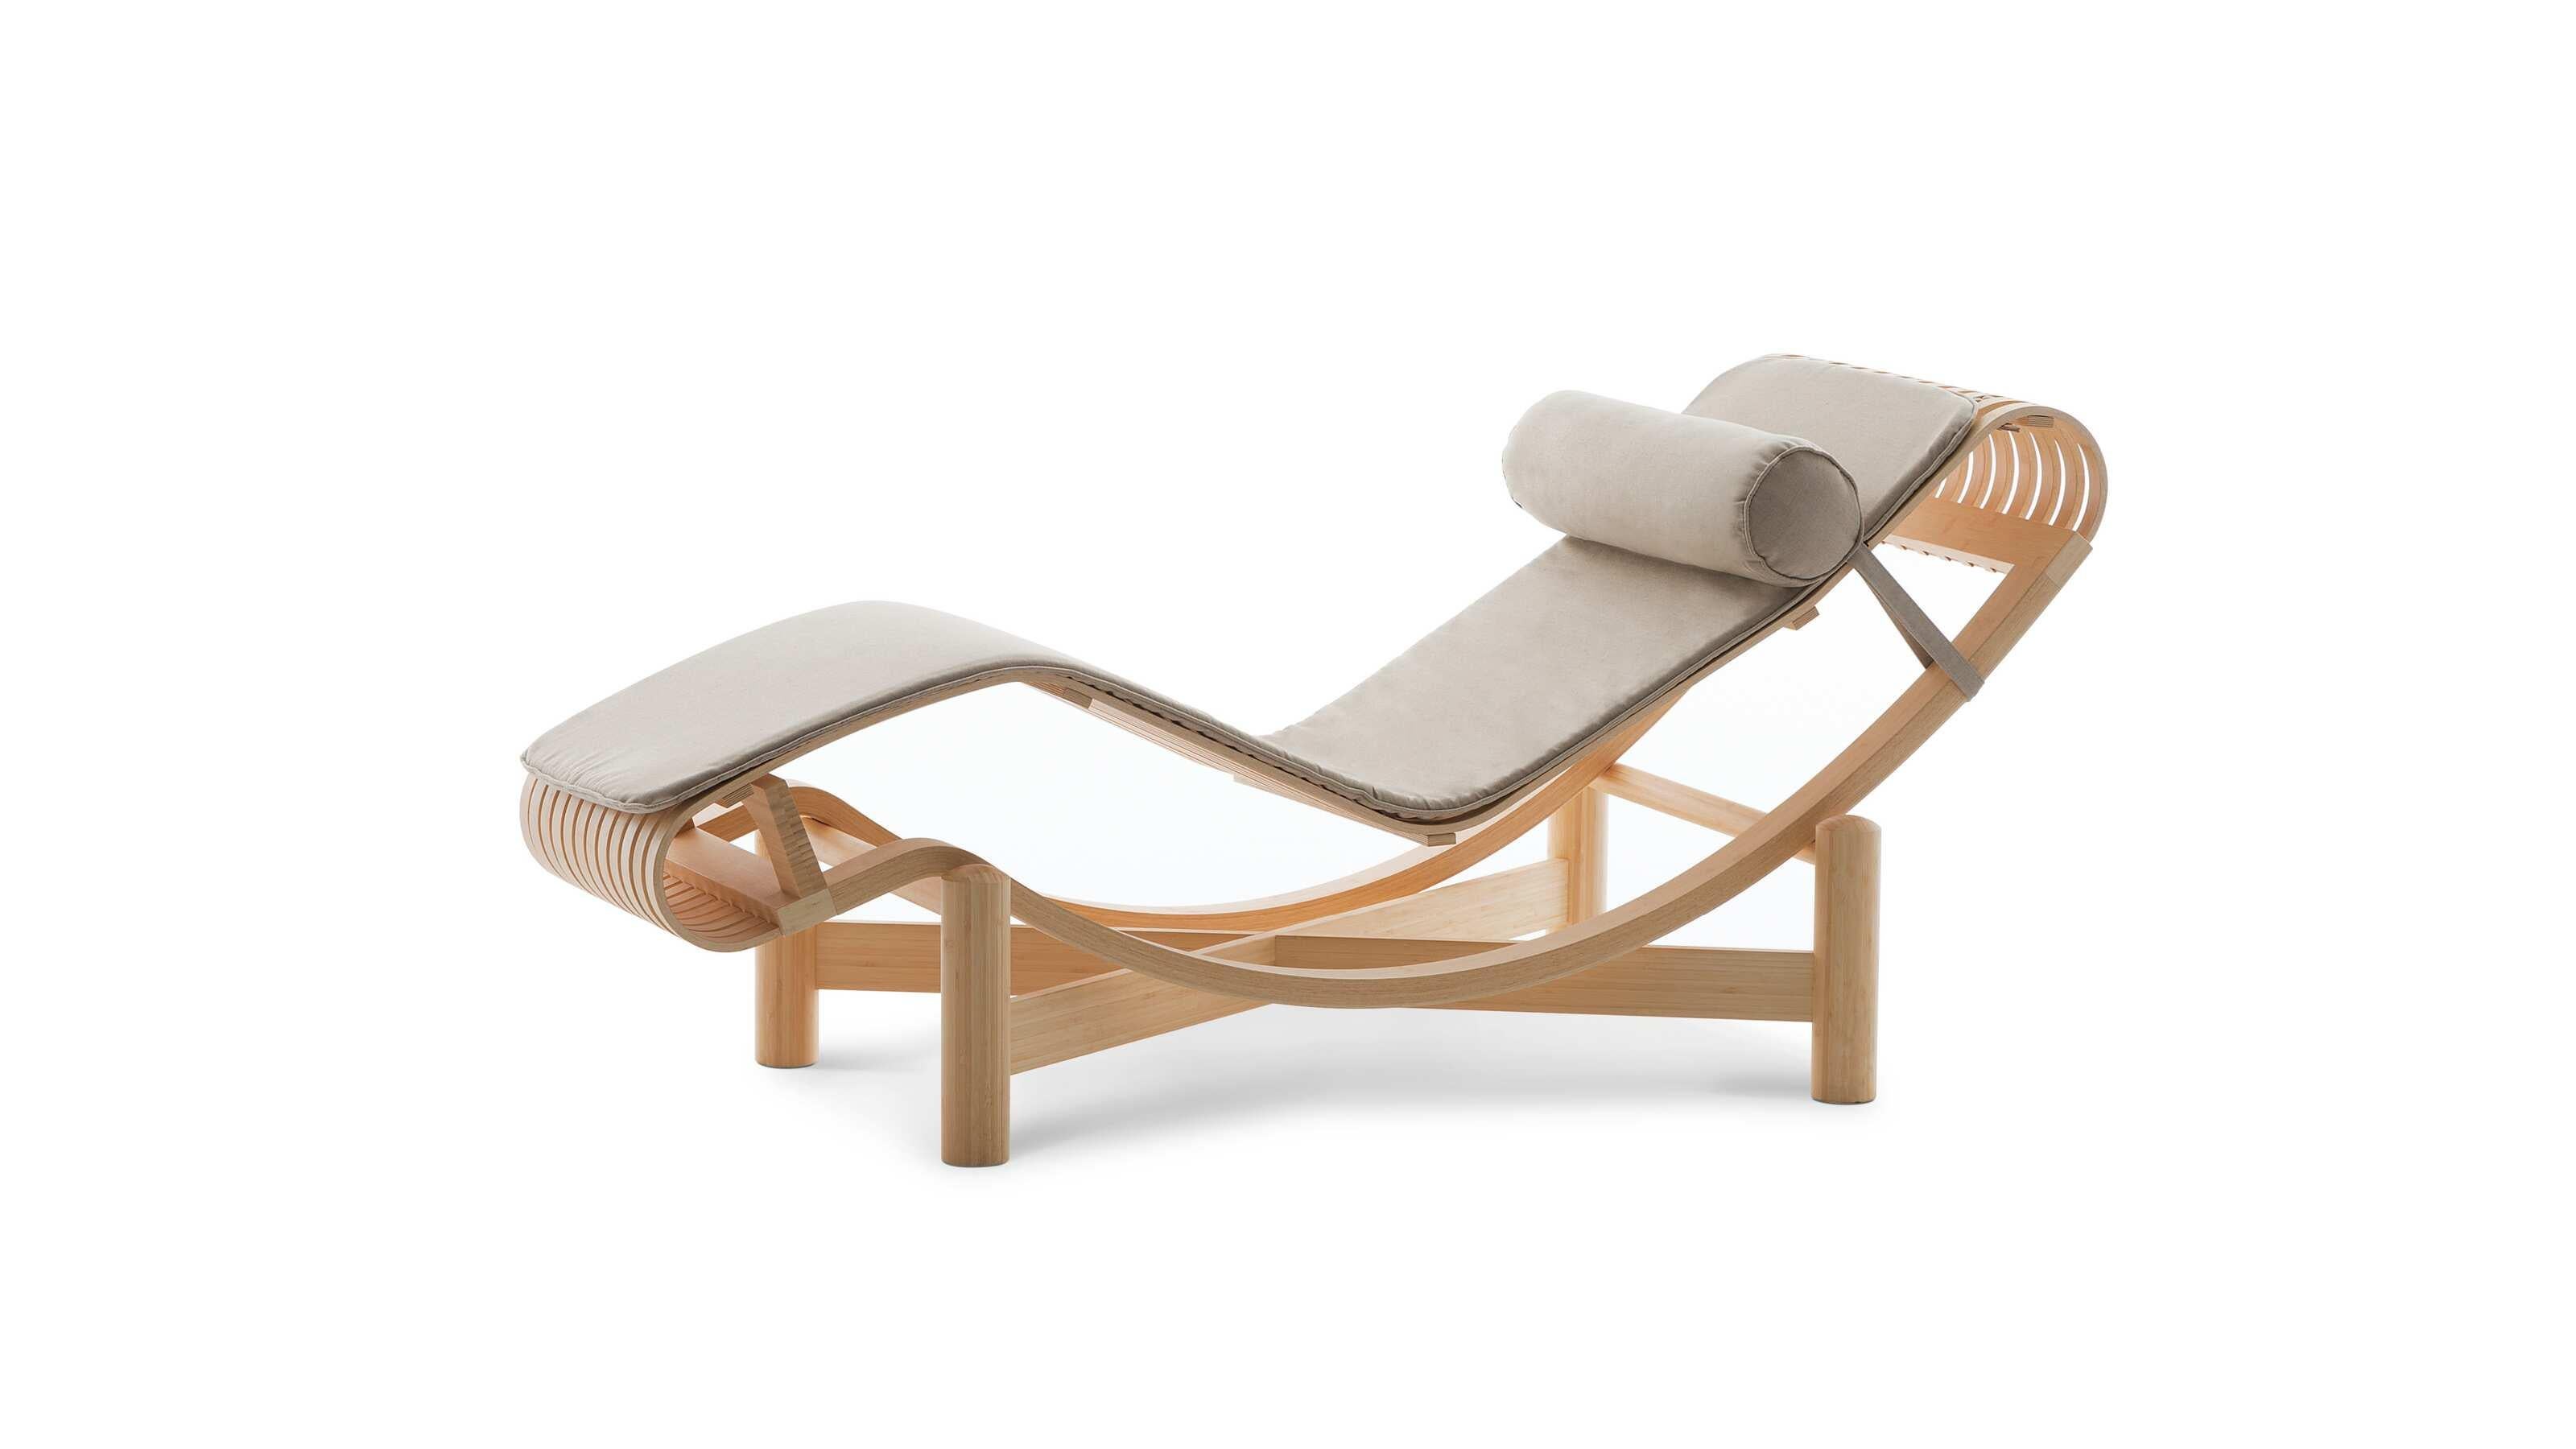 Charlotte Perriand Tokyo Chaise Longue By Cassina For Sale At 1stdibs 